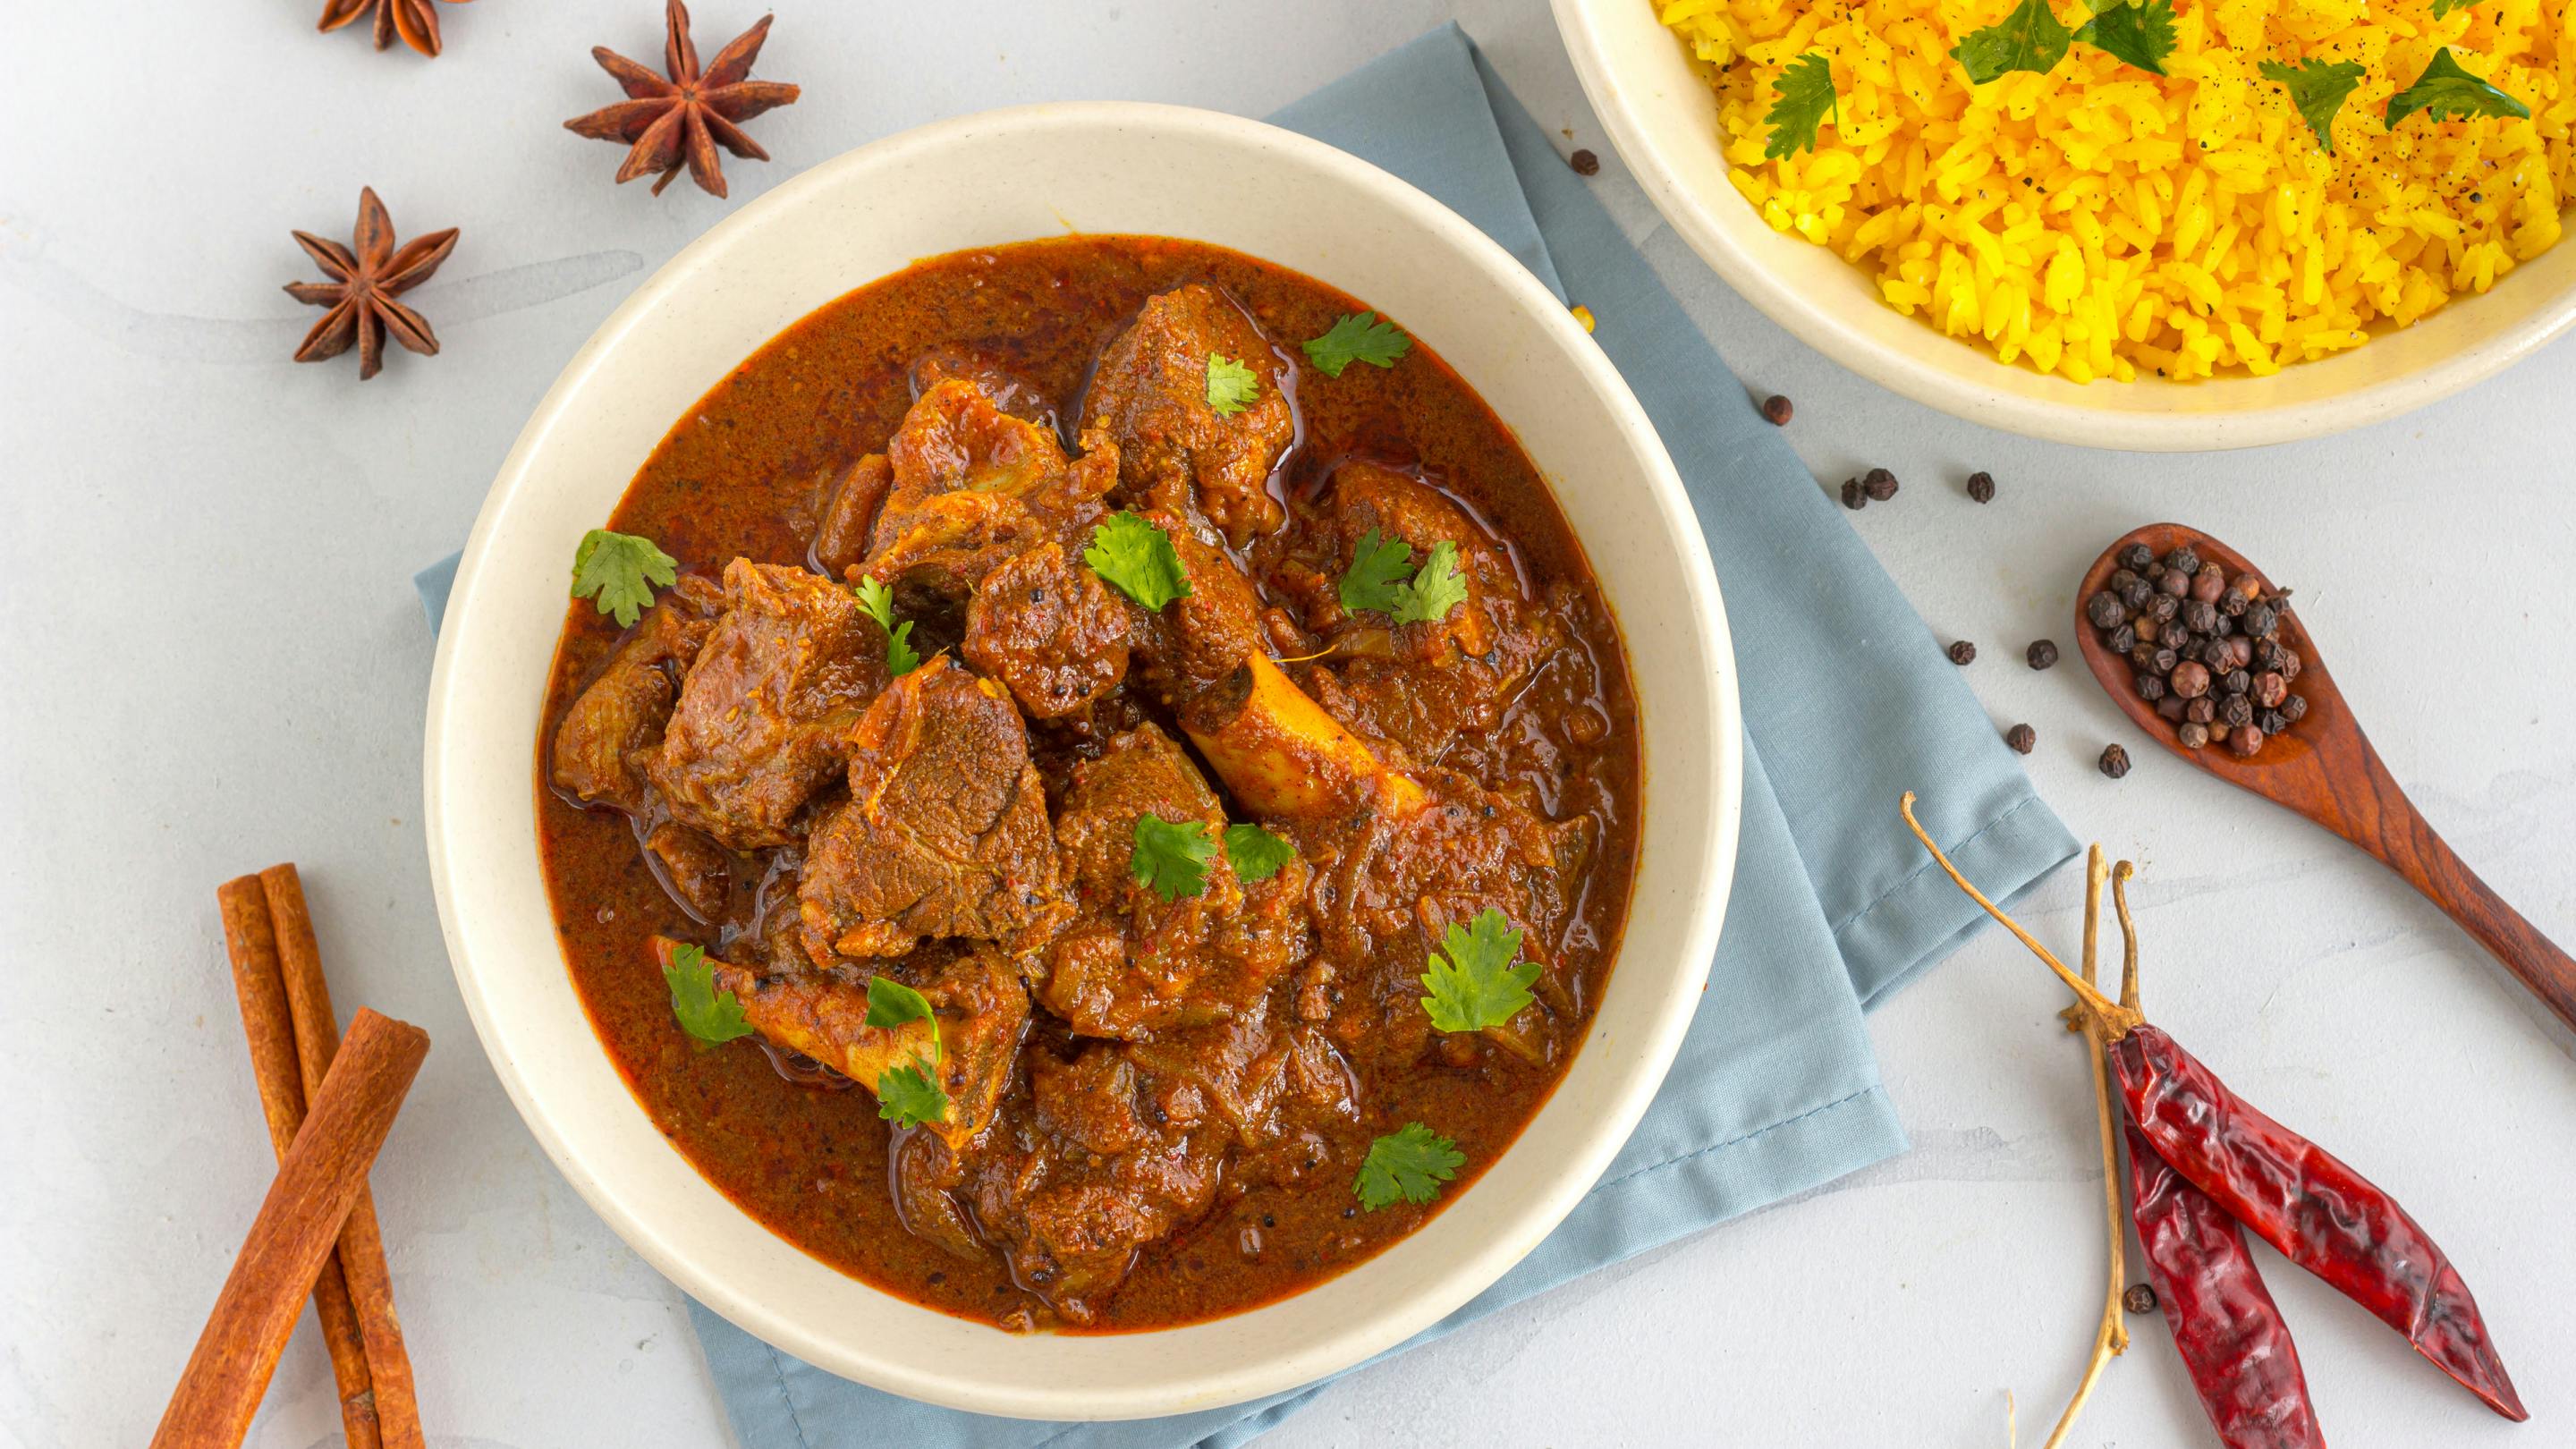 Lamb curry and spices